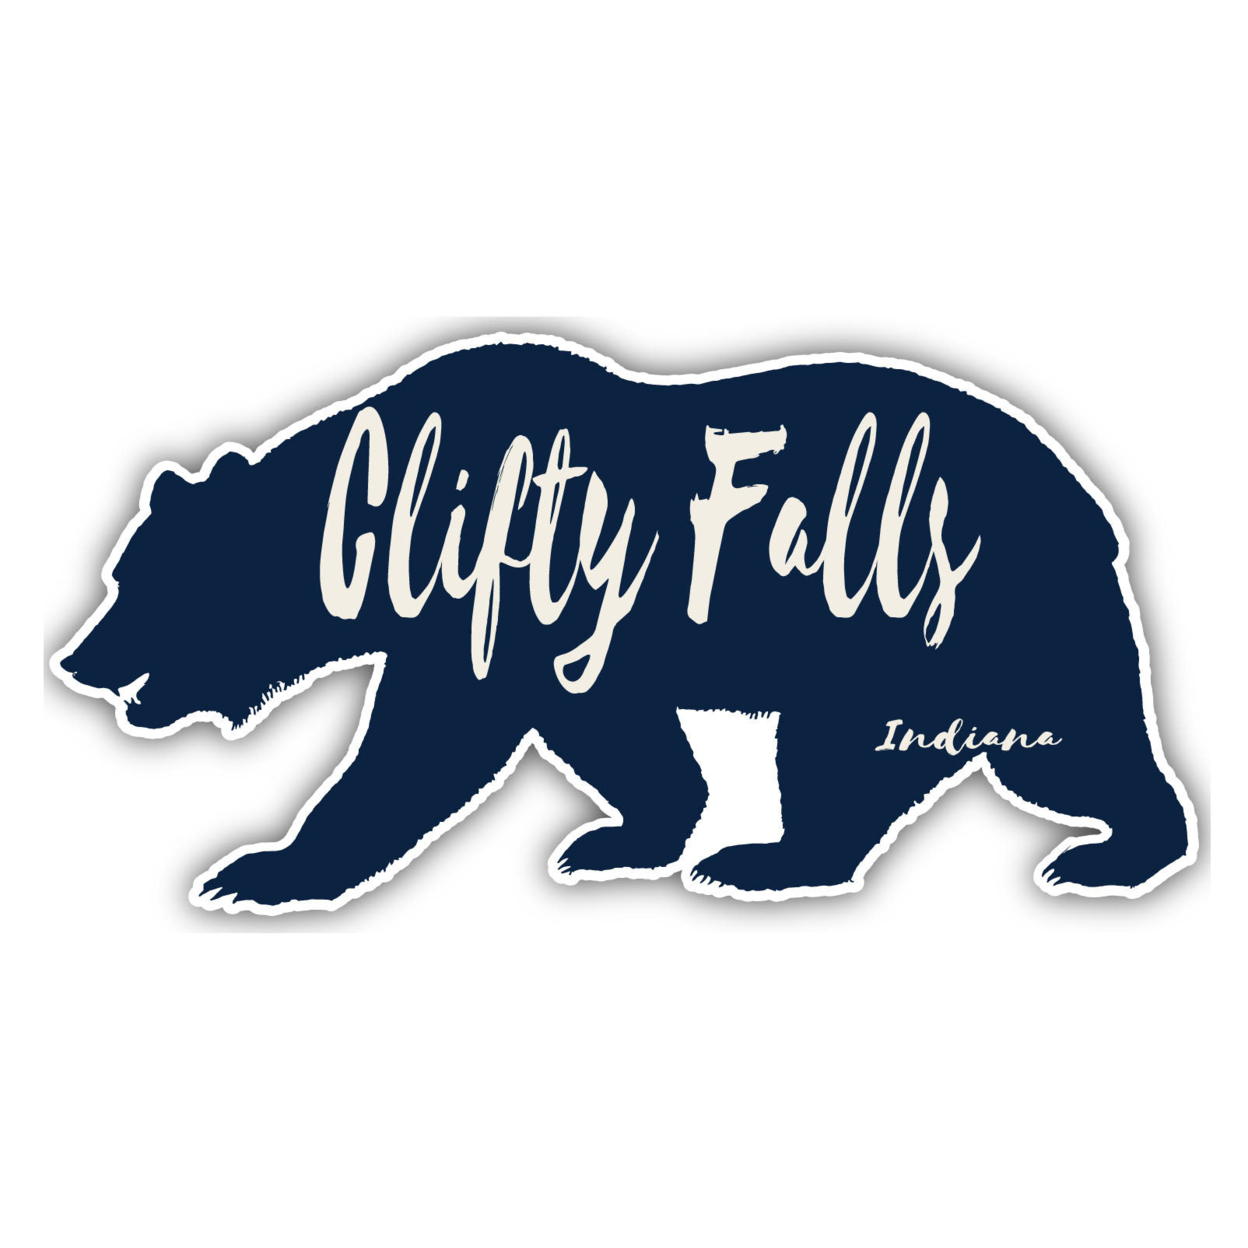 Clifty Falls Indiana Souvenir Decorative Stickers (Choose Theme And Size) - 4-Pack, 6-Inch, Great Outdoors